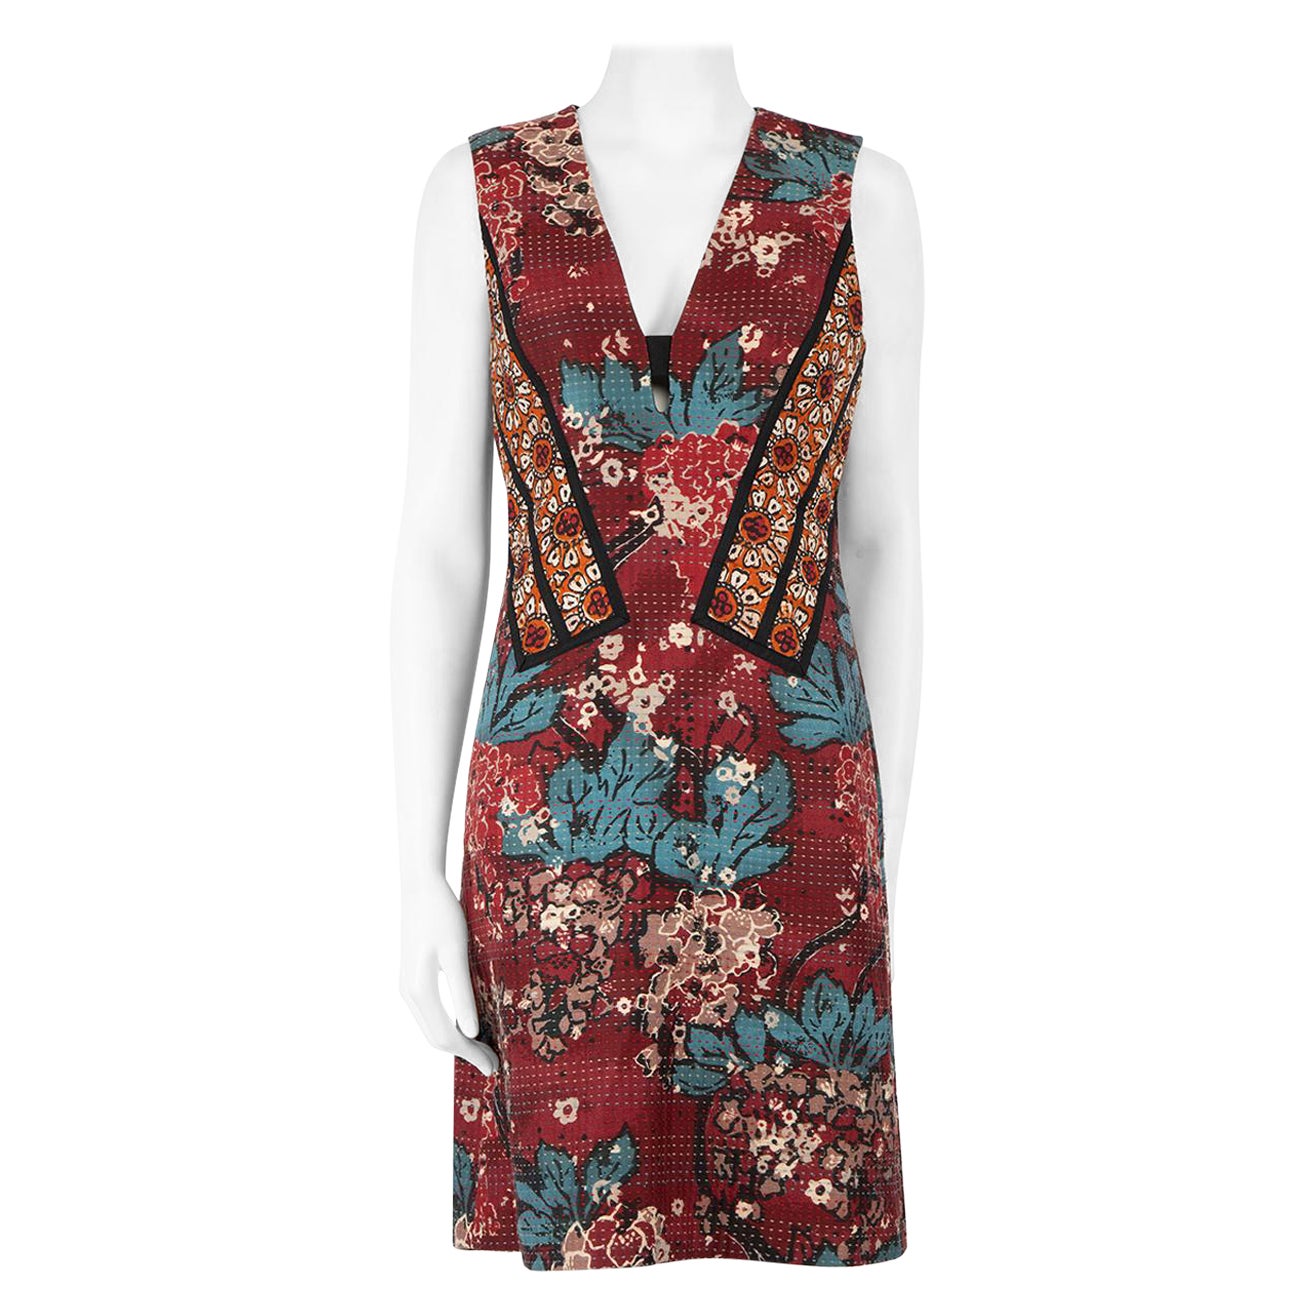 Burberry Burberry Prorsum Burgundy Floral Embroidered Dress Size M For Sale